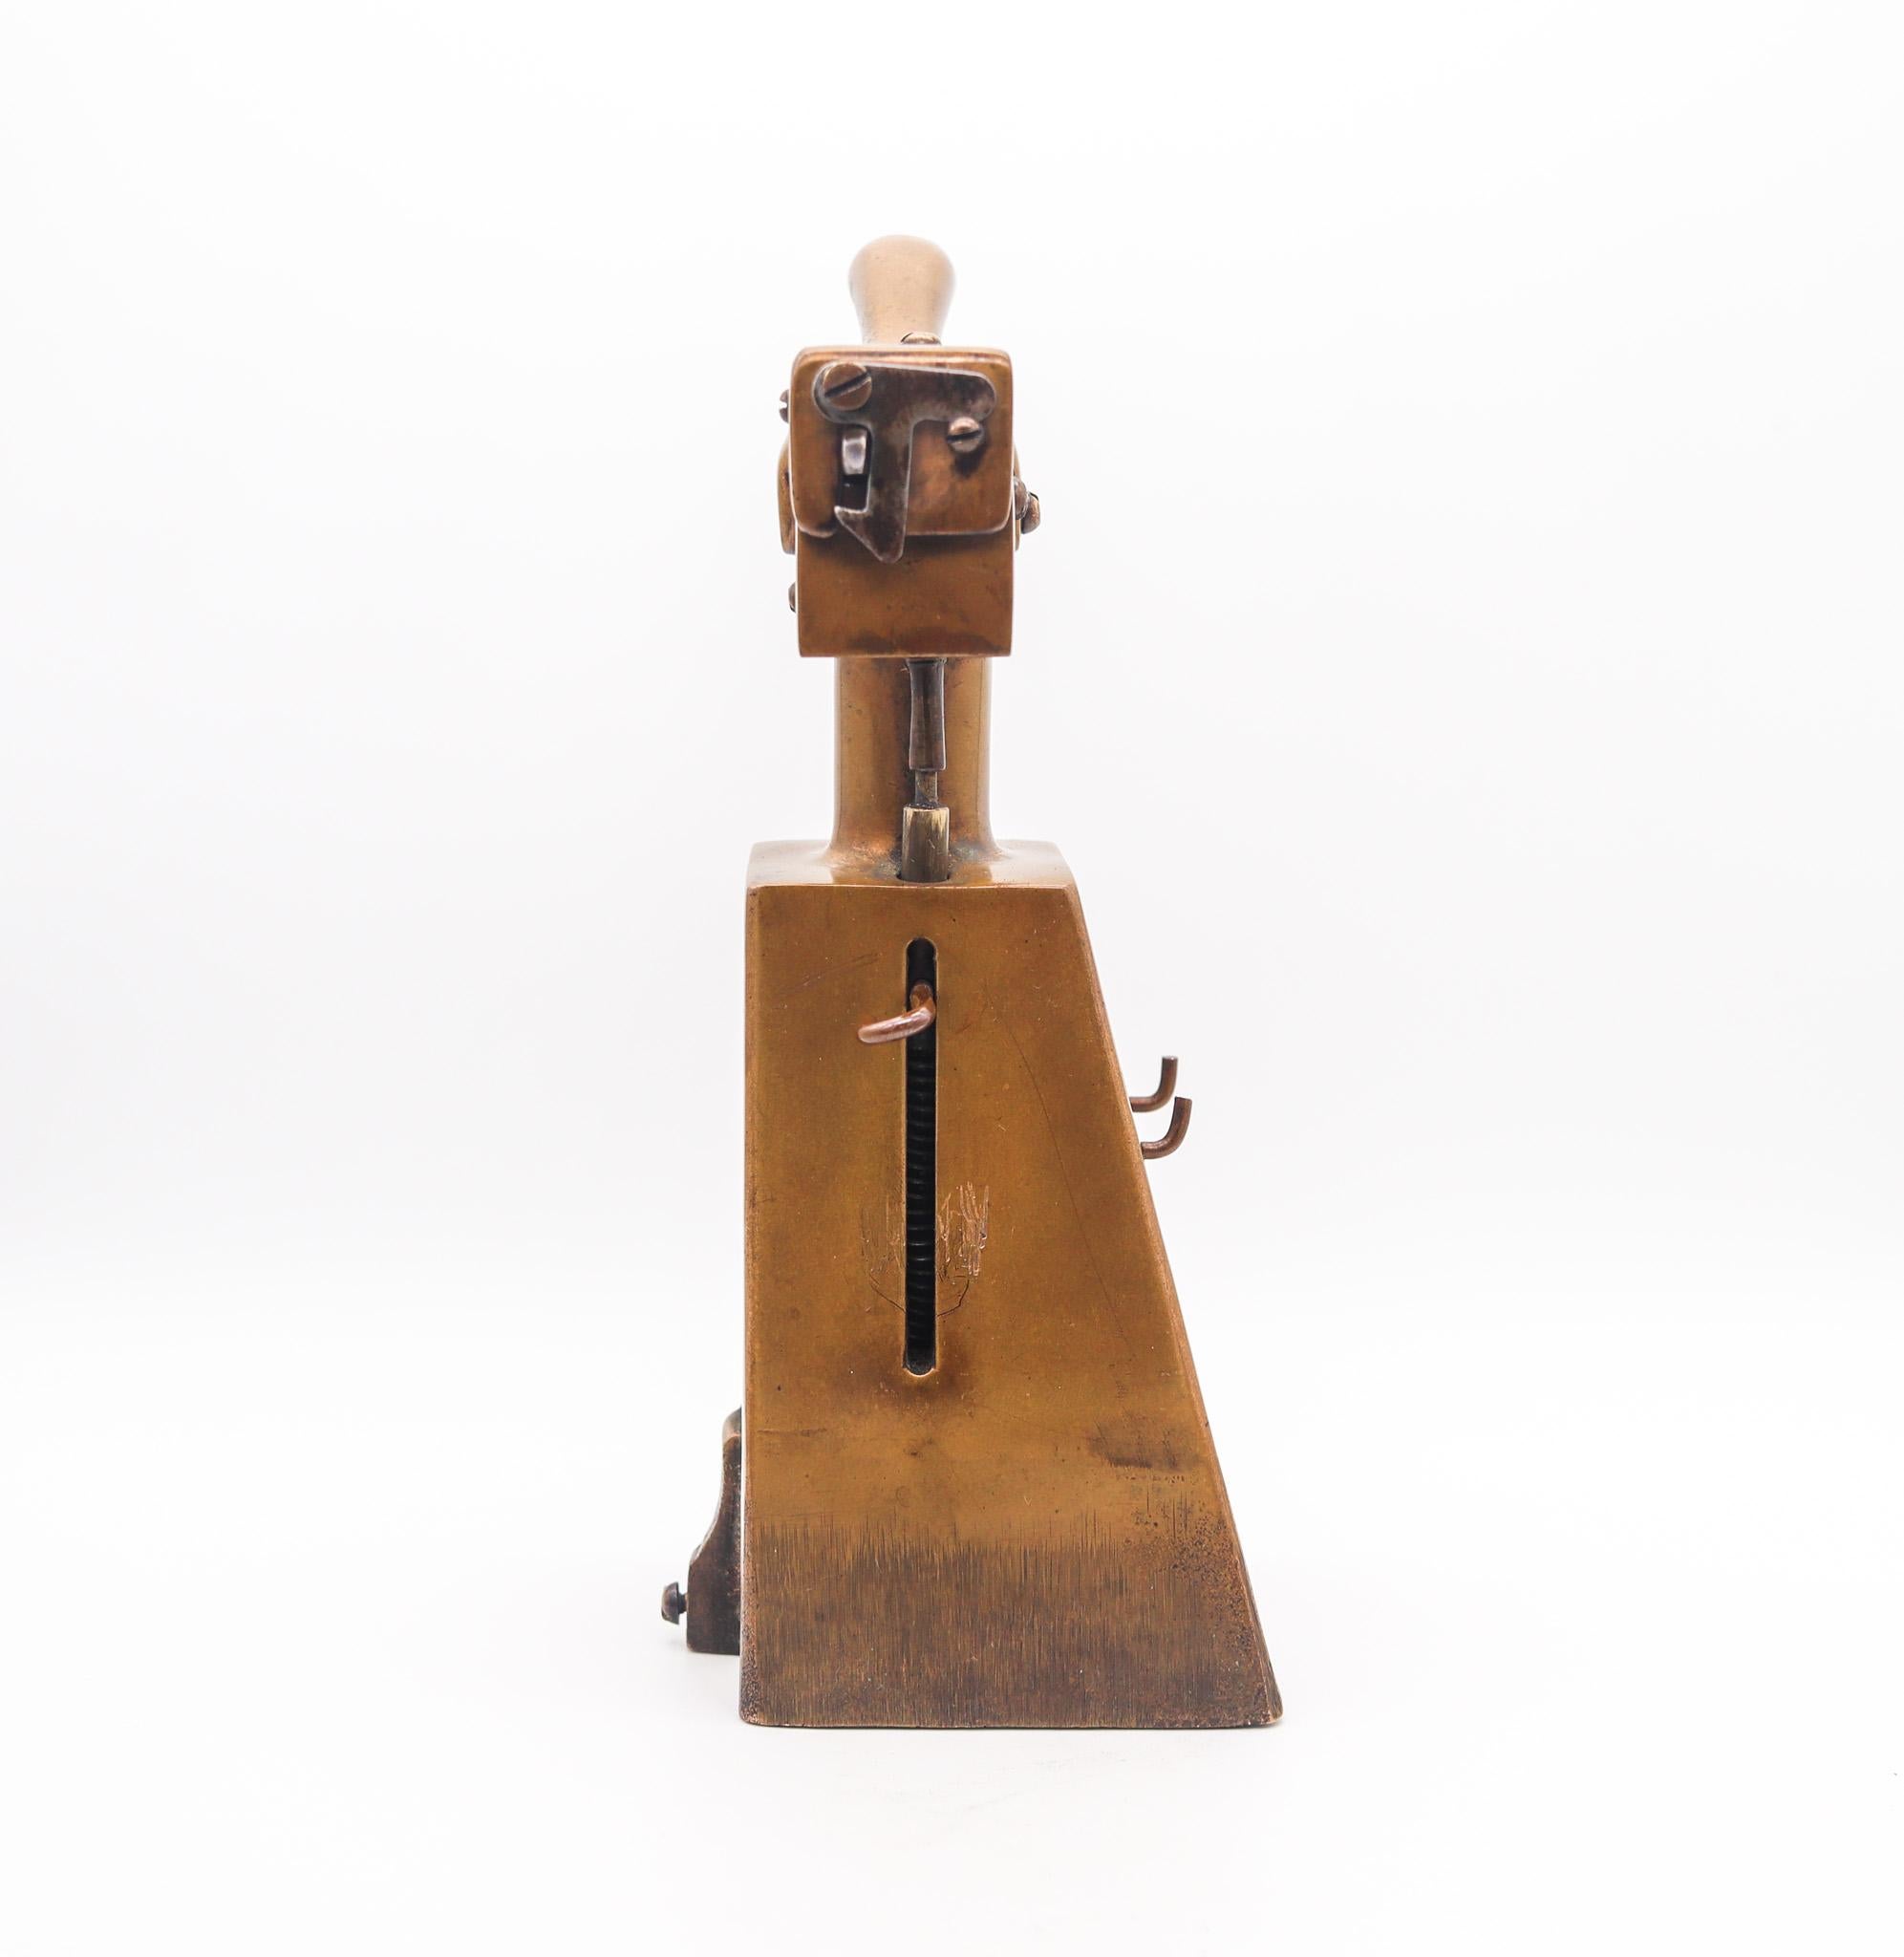 Desk table lighter designed by Samuel E. Ghinn.

This is a superb and very rare table desk semi automatic petrol lighter, created in Cincinnati Ohio by Samuel E. Ghinn, back in 1923. This lighter was manufactured at the S.E. Guinn Mfg. Co. with